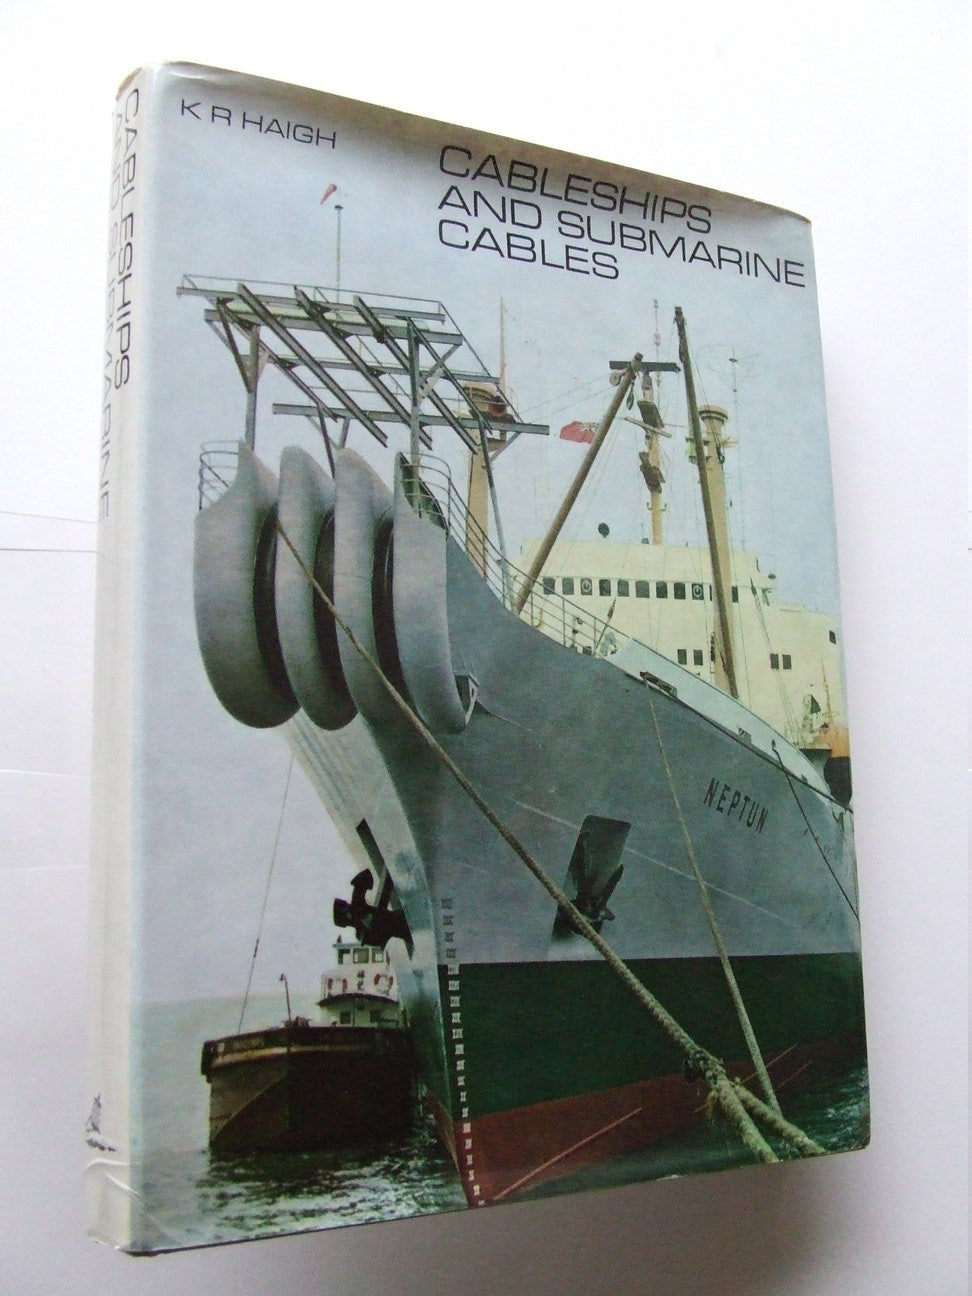 Cableships and Submarine Cables